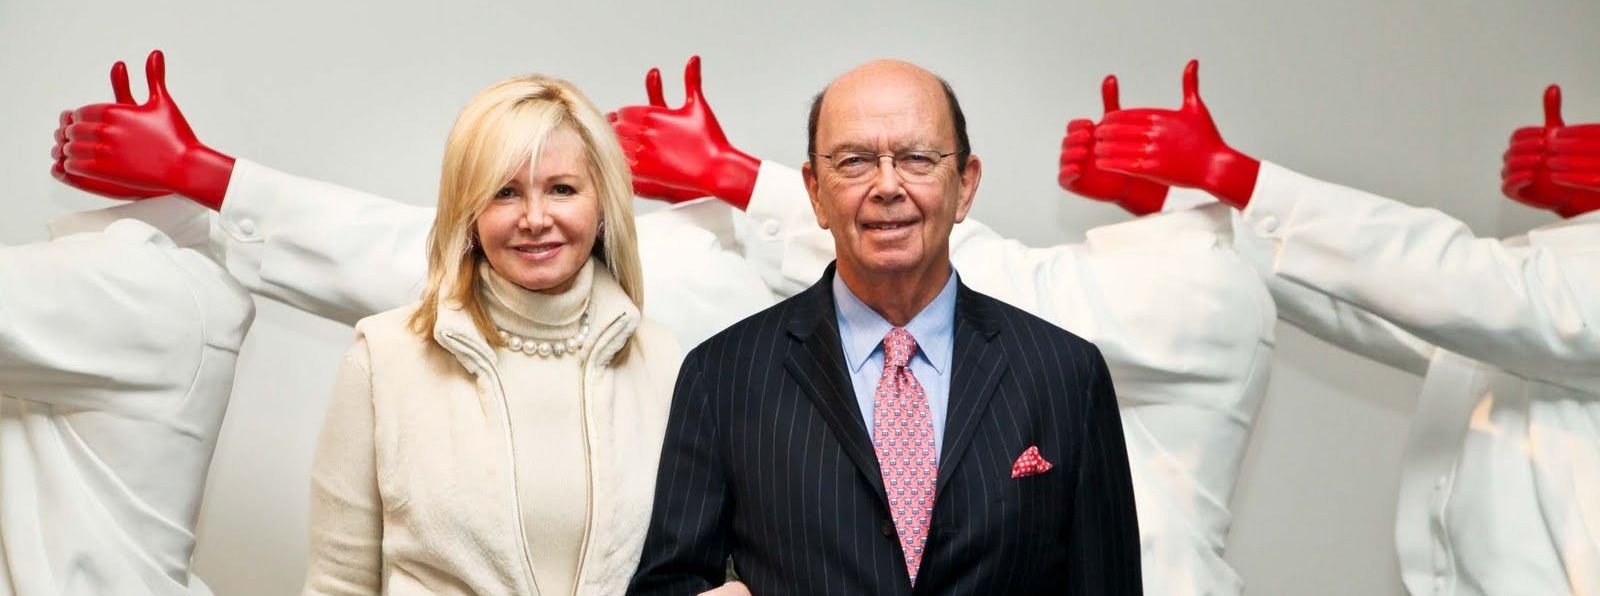 Billionaire art Collector paid $100 Million for his own Collection